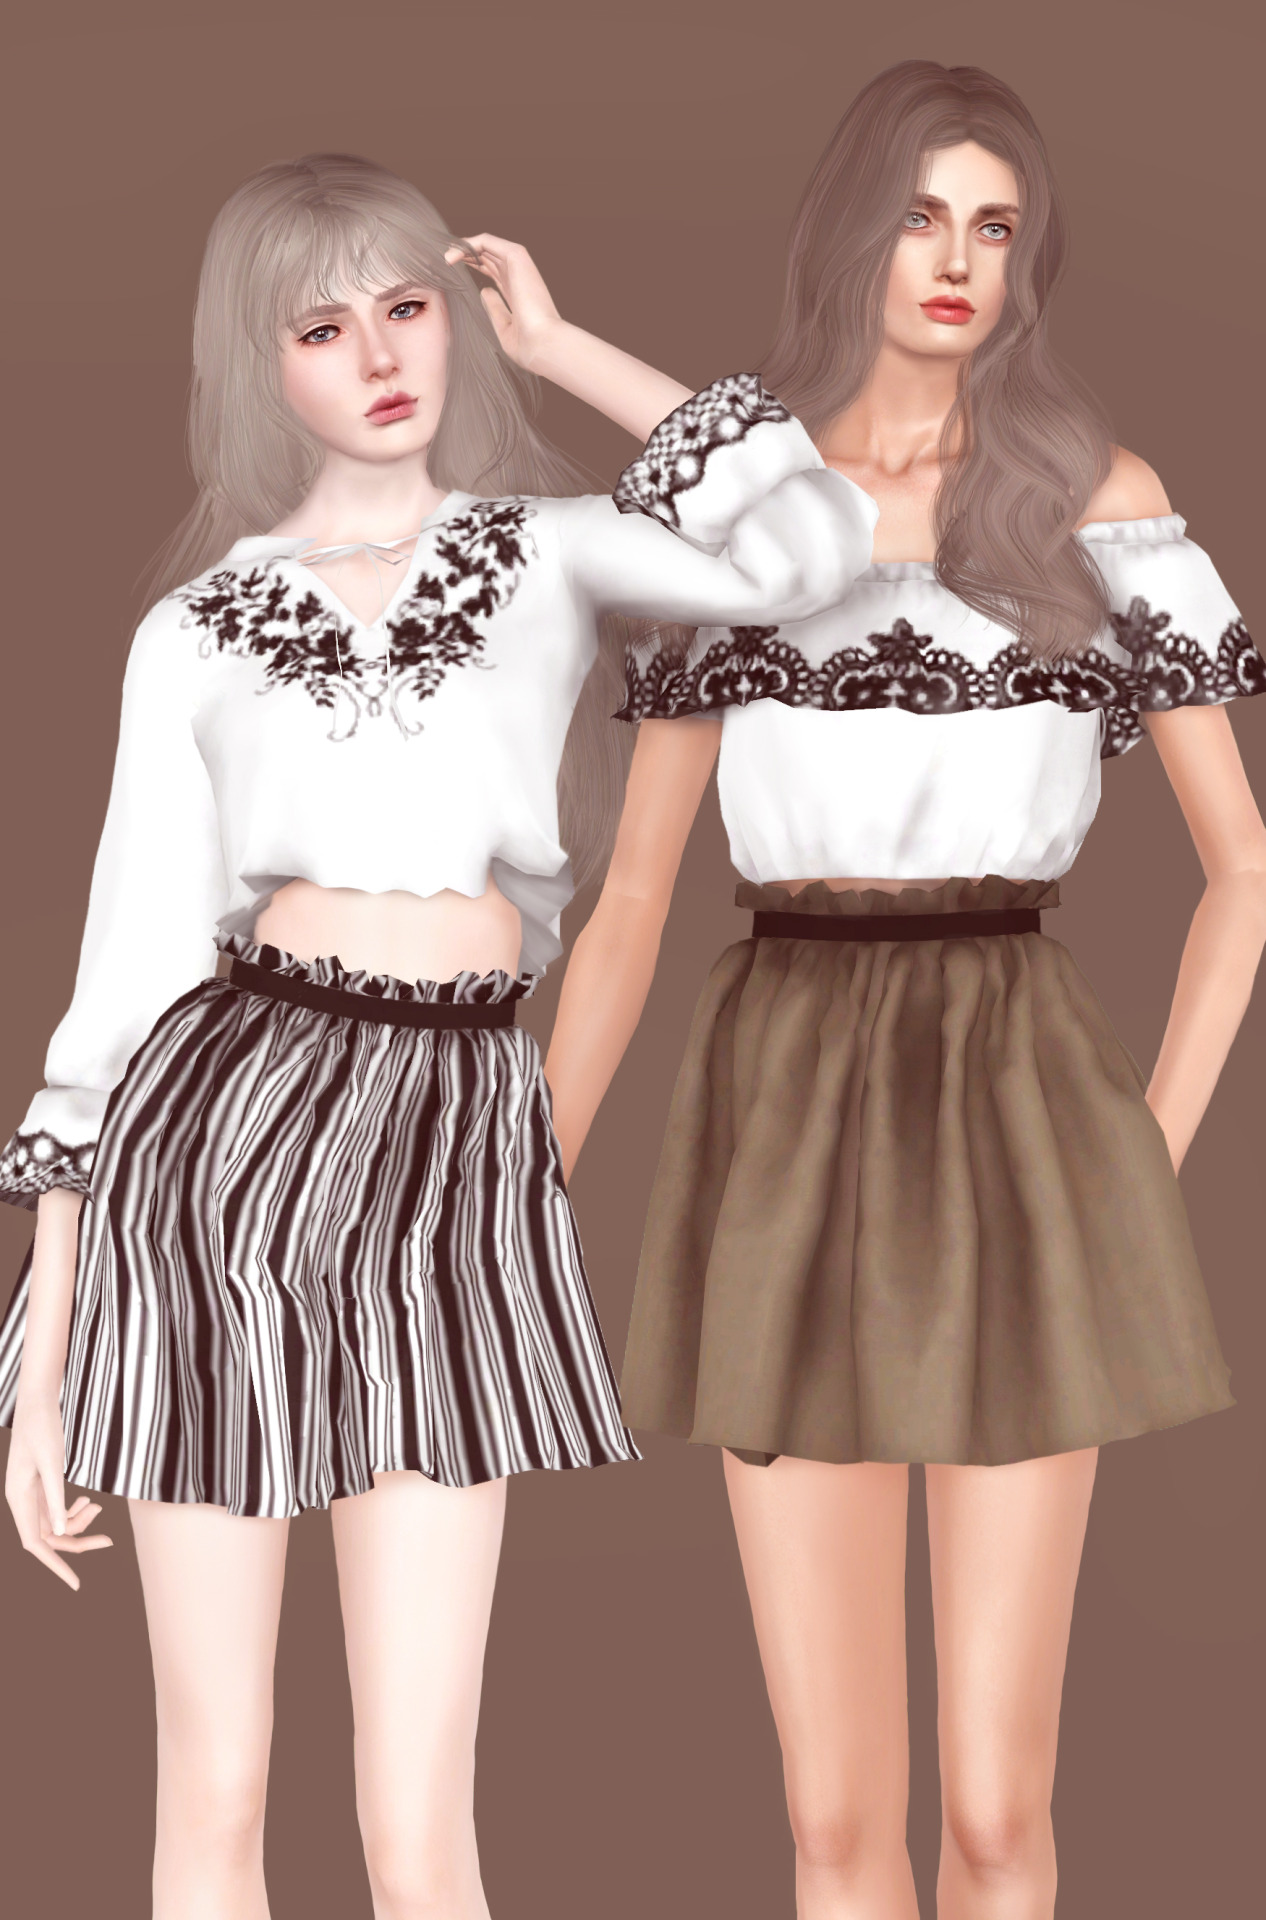 IdkMy Sims 3 CC Finds — spectacledchic: RESORT September Collection by...